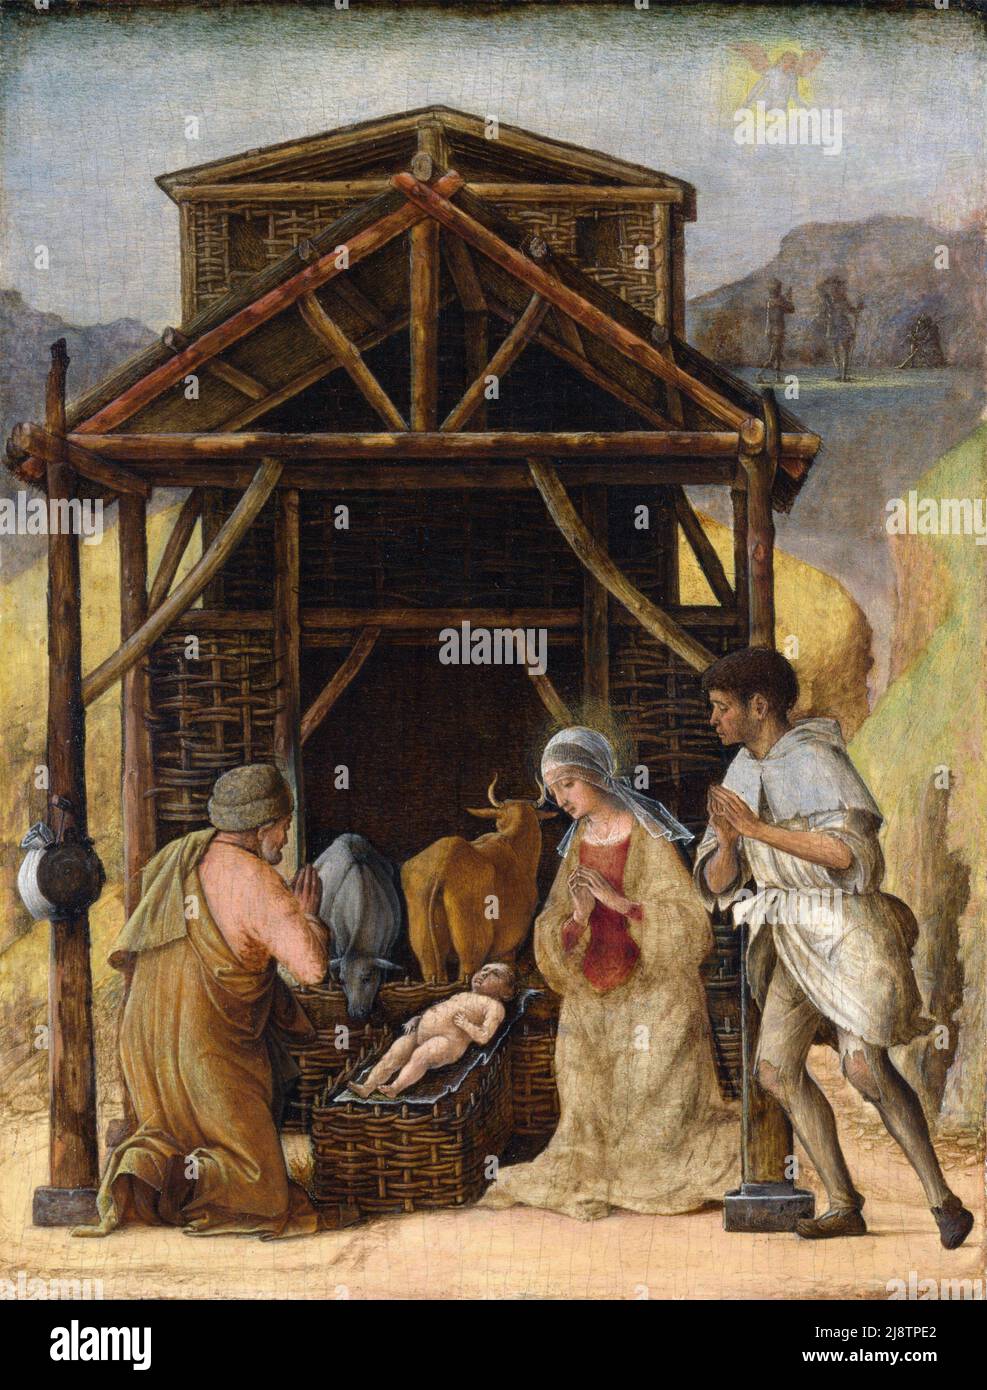 The Adoration of the Shepherds by the early Renaissance Italian artist, Ercole de' Roberti (c. 1451-1496), tempera on wood, c. 1490 Stock Photo